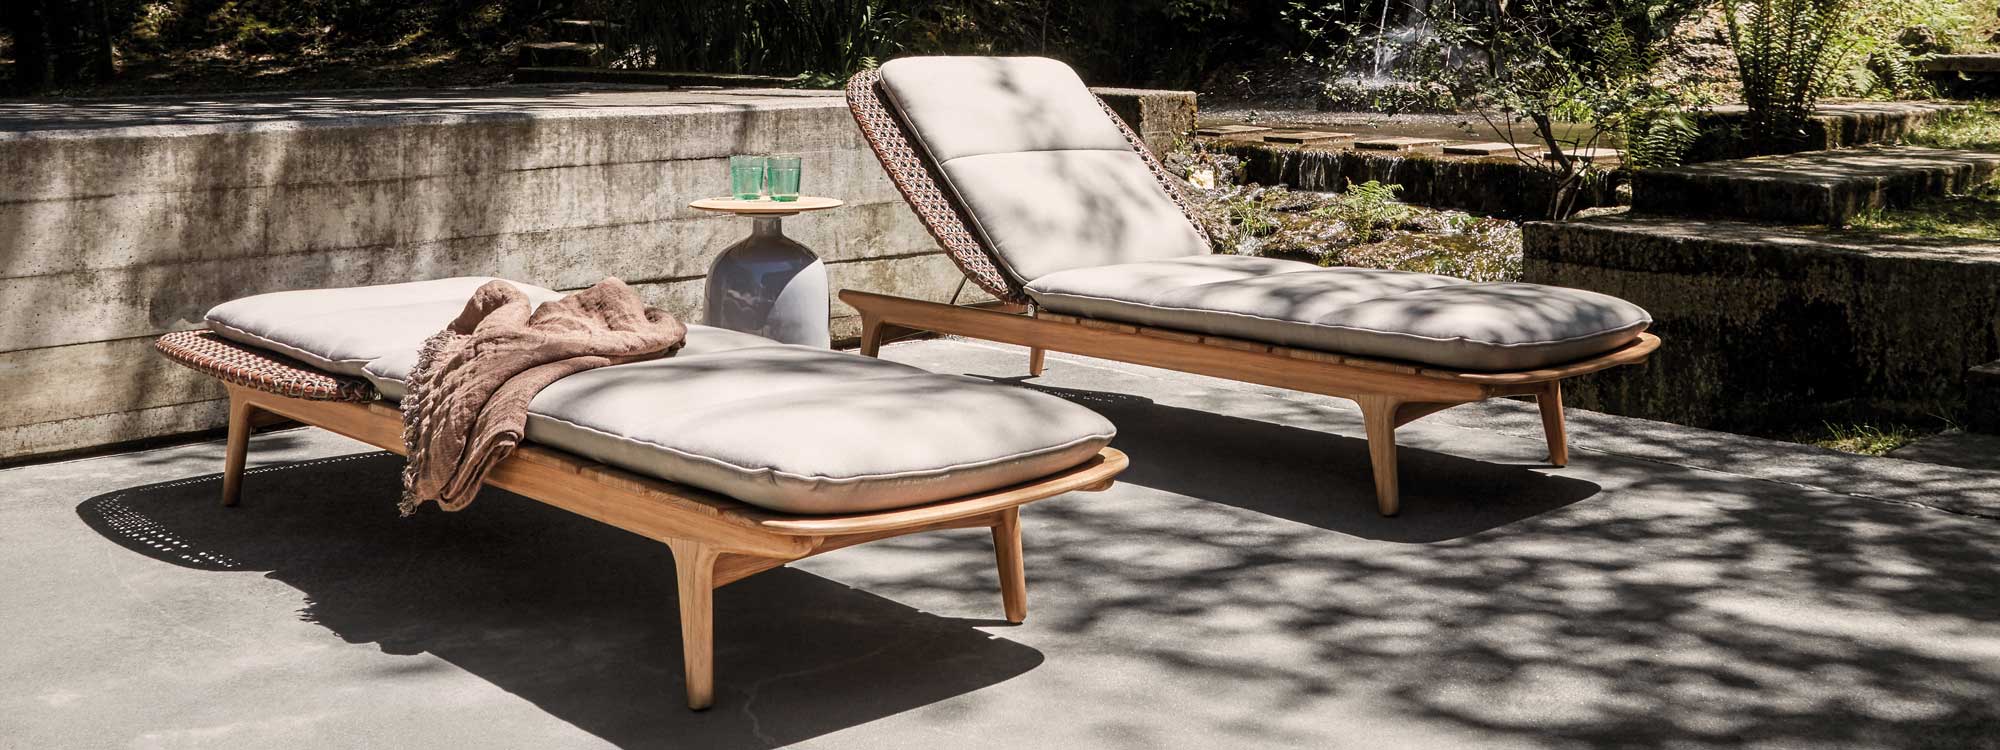 Image of pair of Gloster Kay adjustable teak & wicker sun loungers in sun & shade on terrace